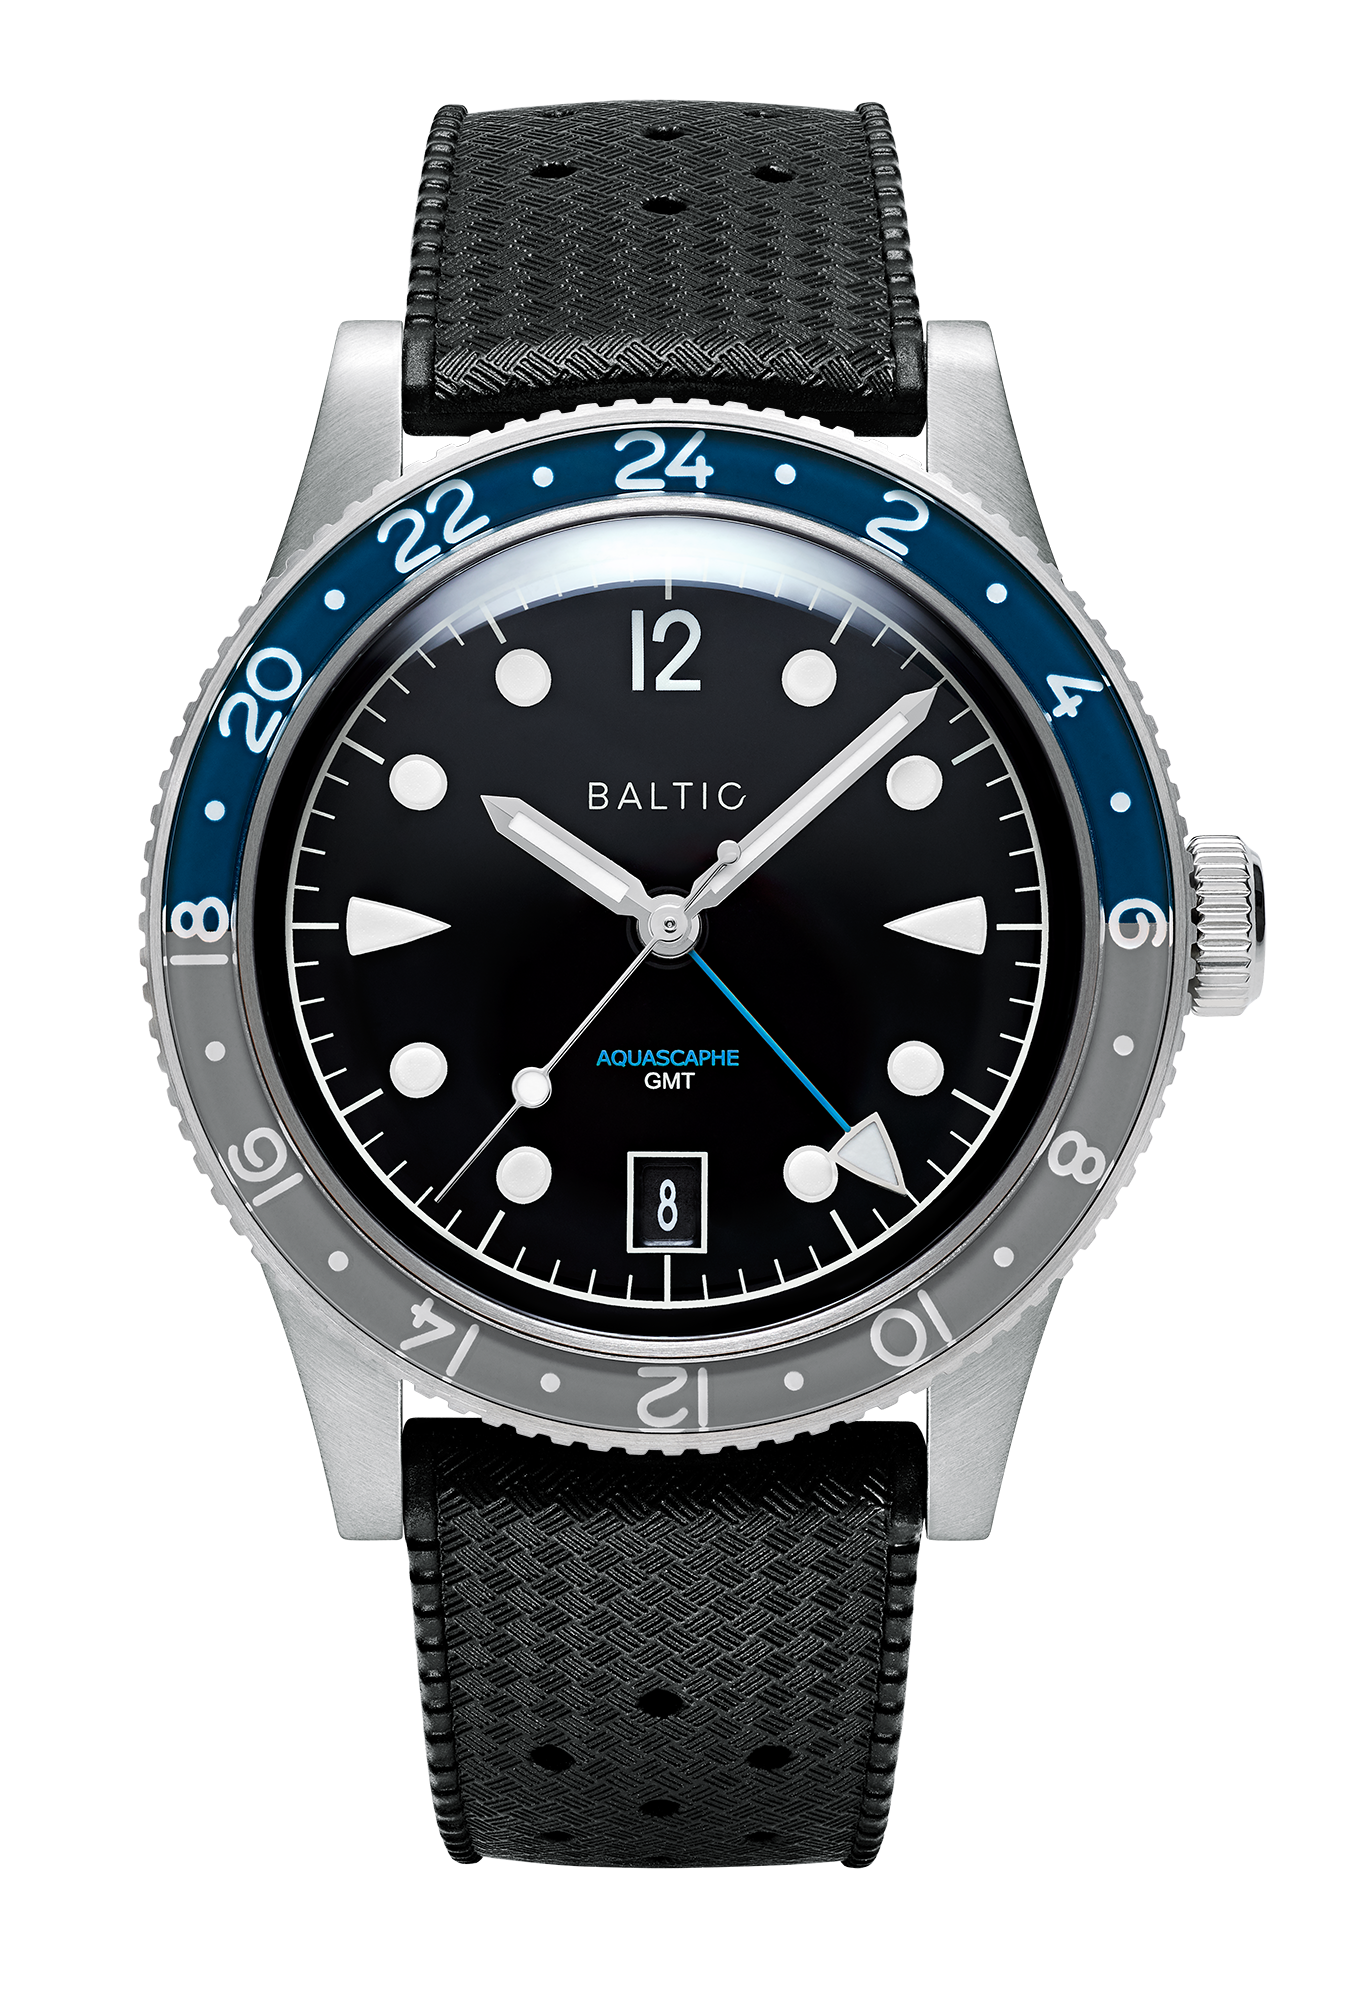 Aquascaphe GMT collection - Baltic Watches